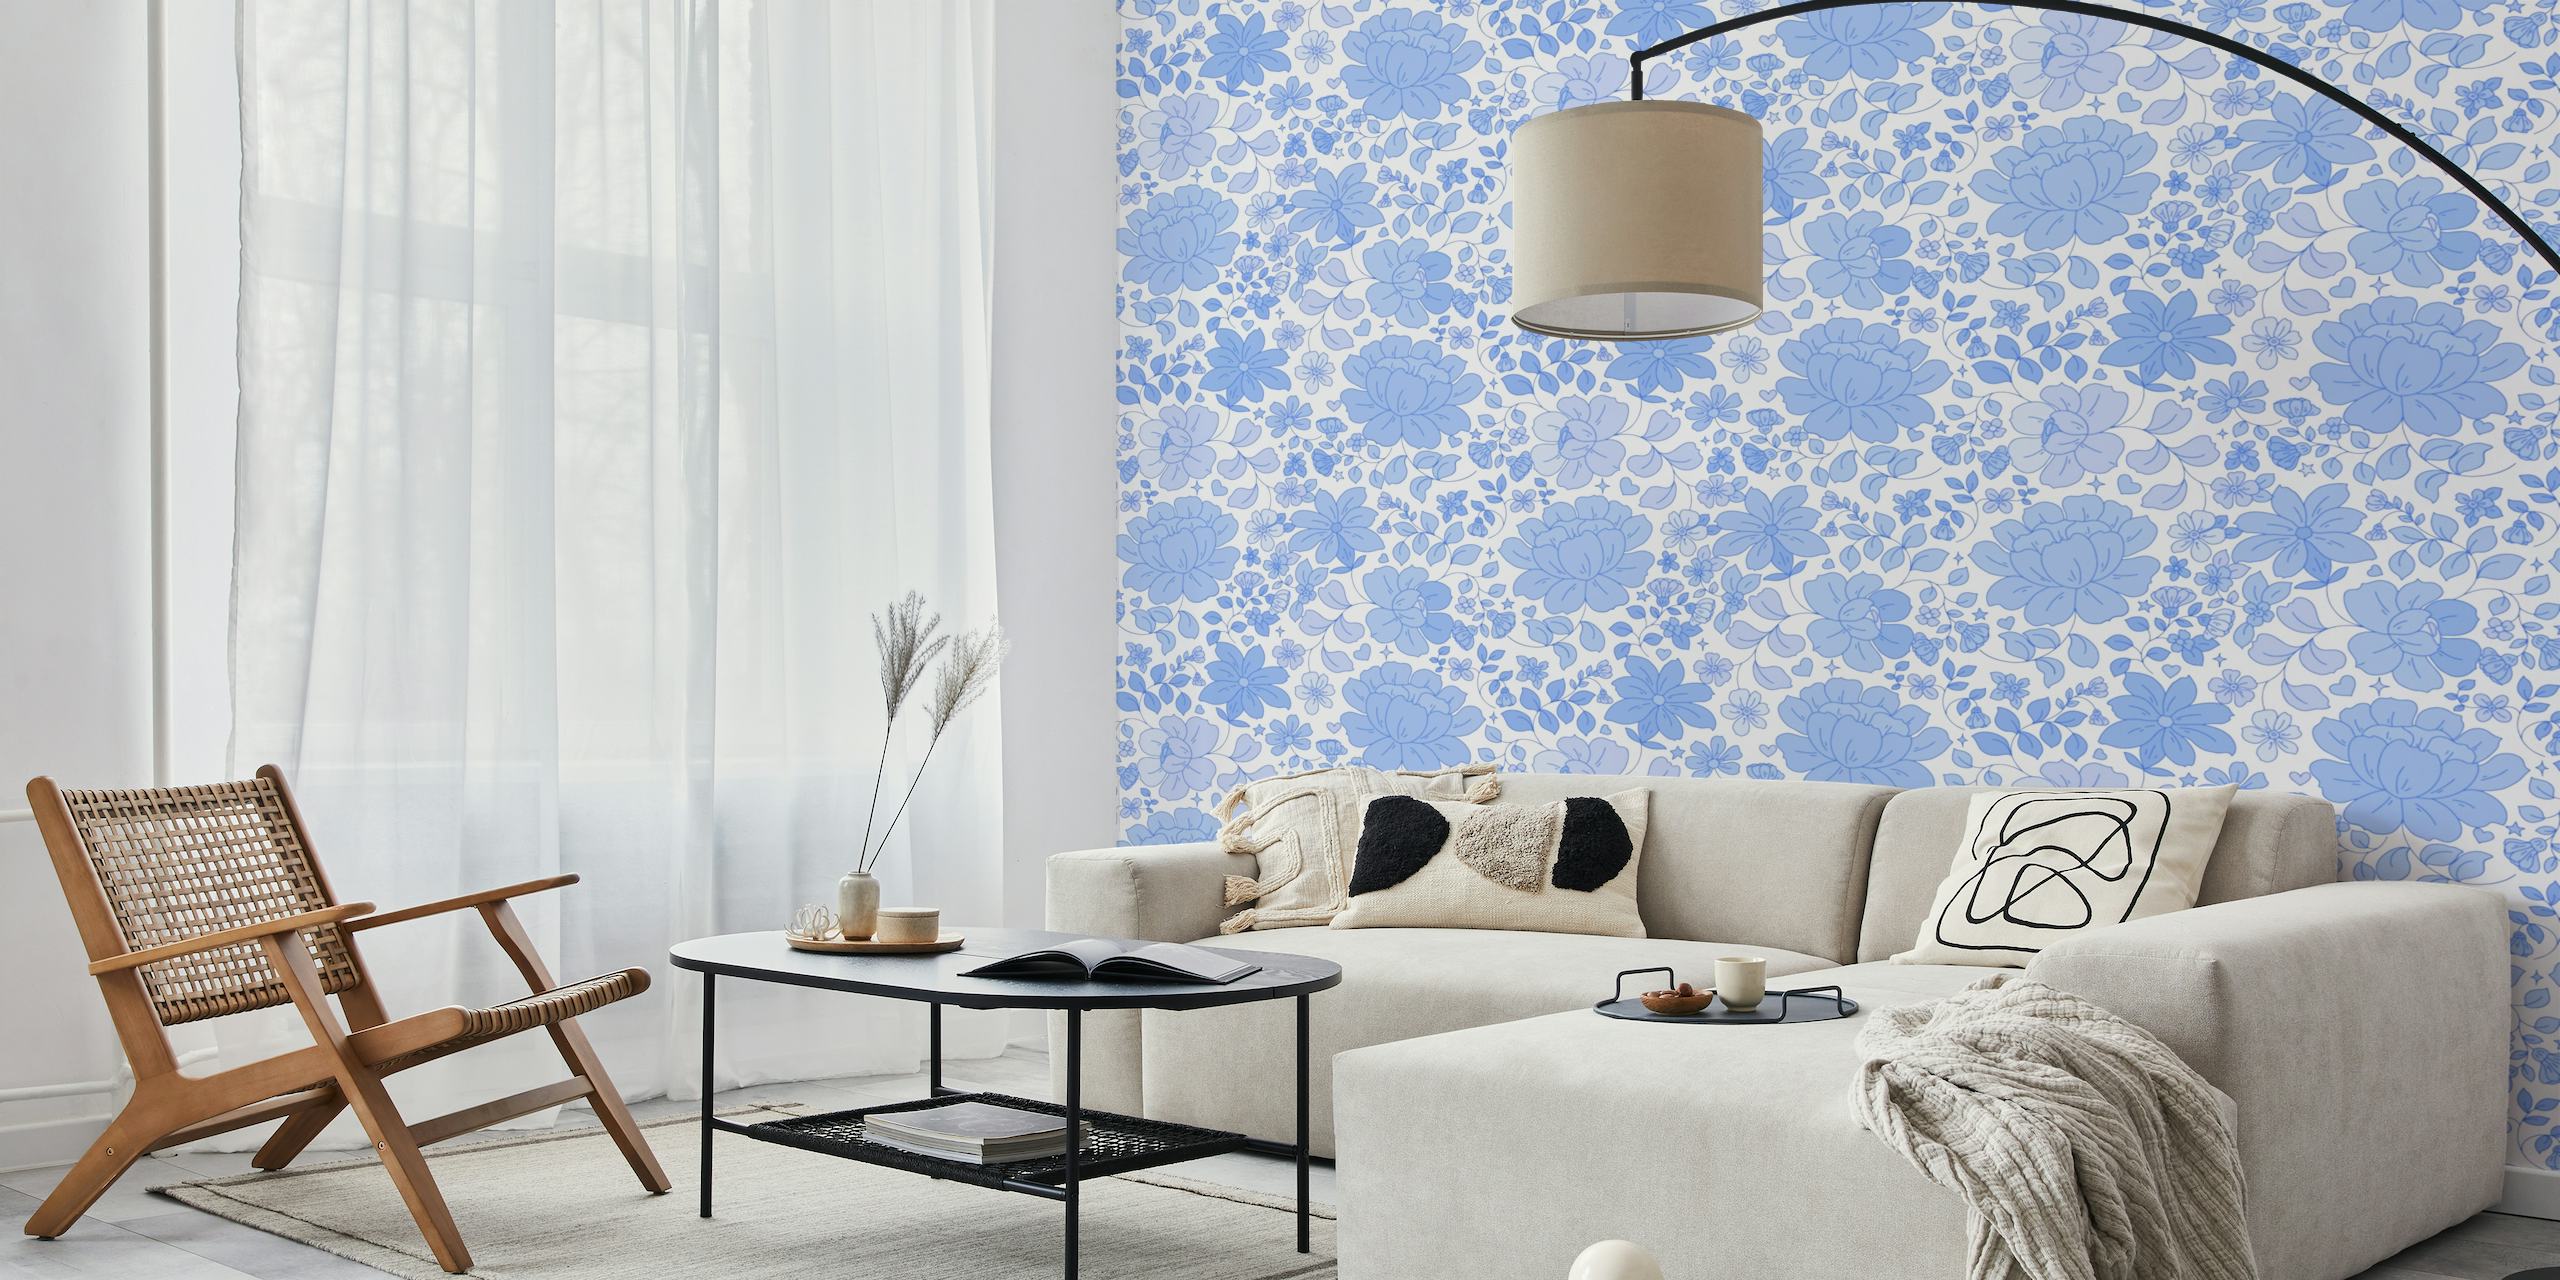 Blue lace pattern wall mural called Amelia